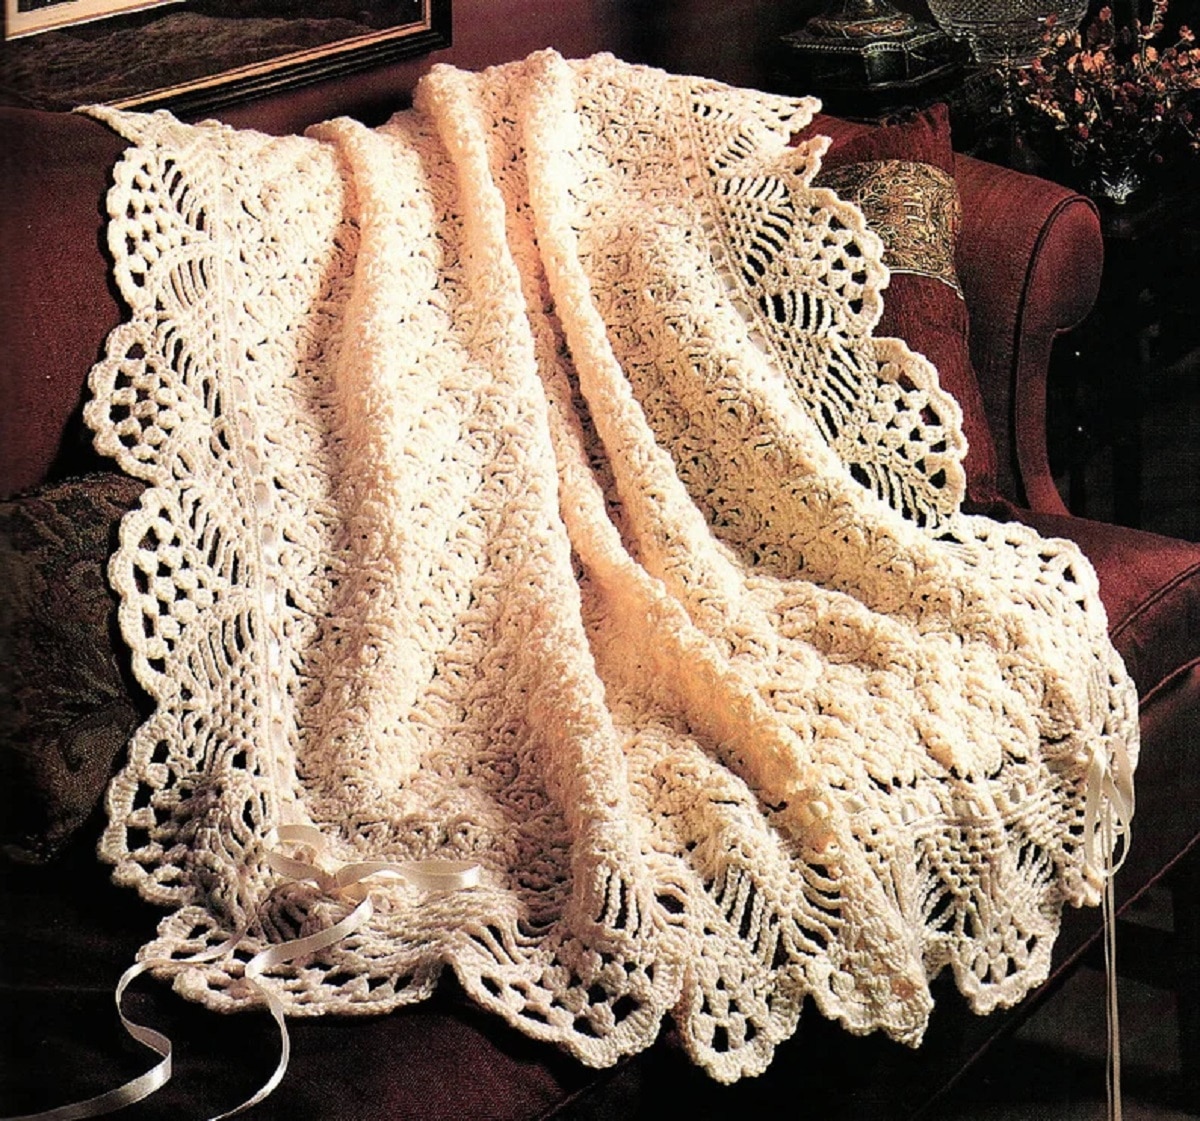 Victorian style lace crochet afghan in pale pink with cream lace trim draped on a maroon sofa.